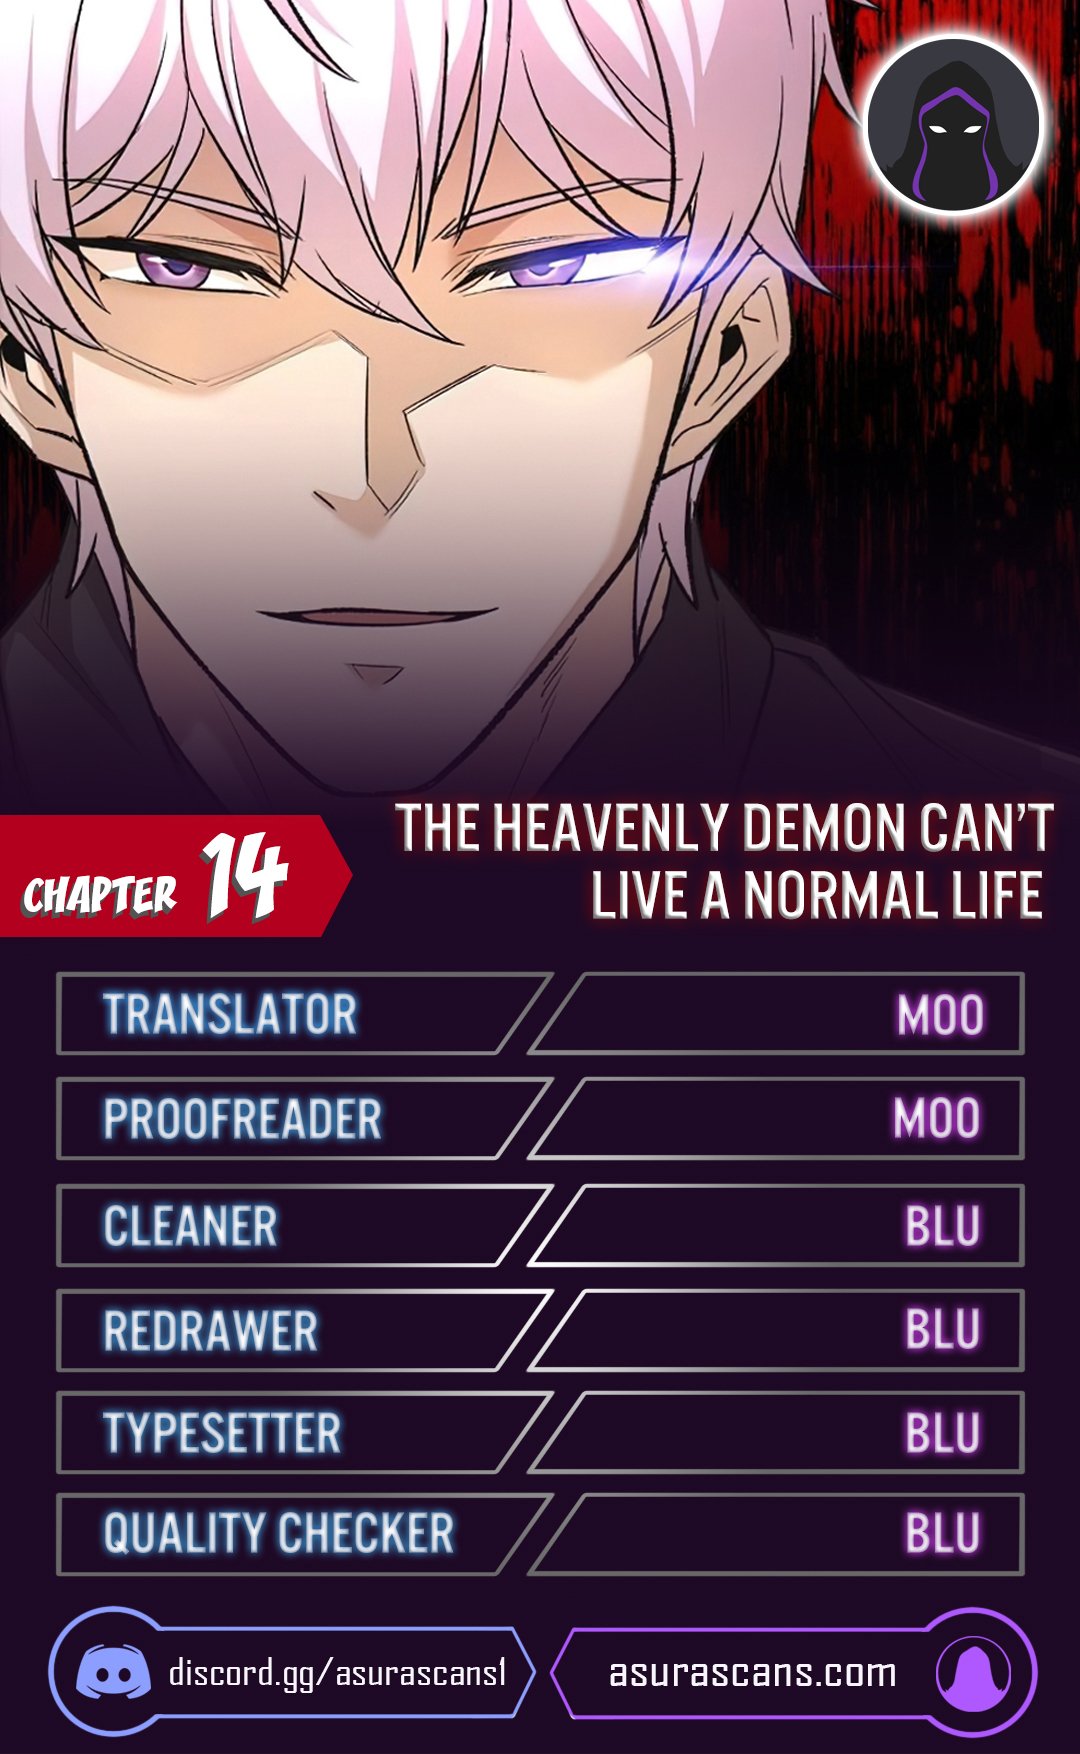 The Heavenly Demon Can't Live a Normal Life - Chapter 24243 - Image 1